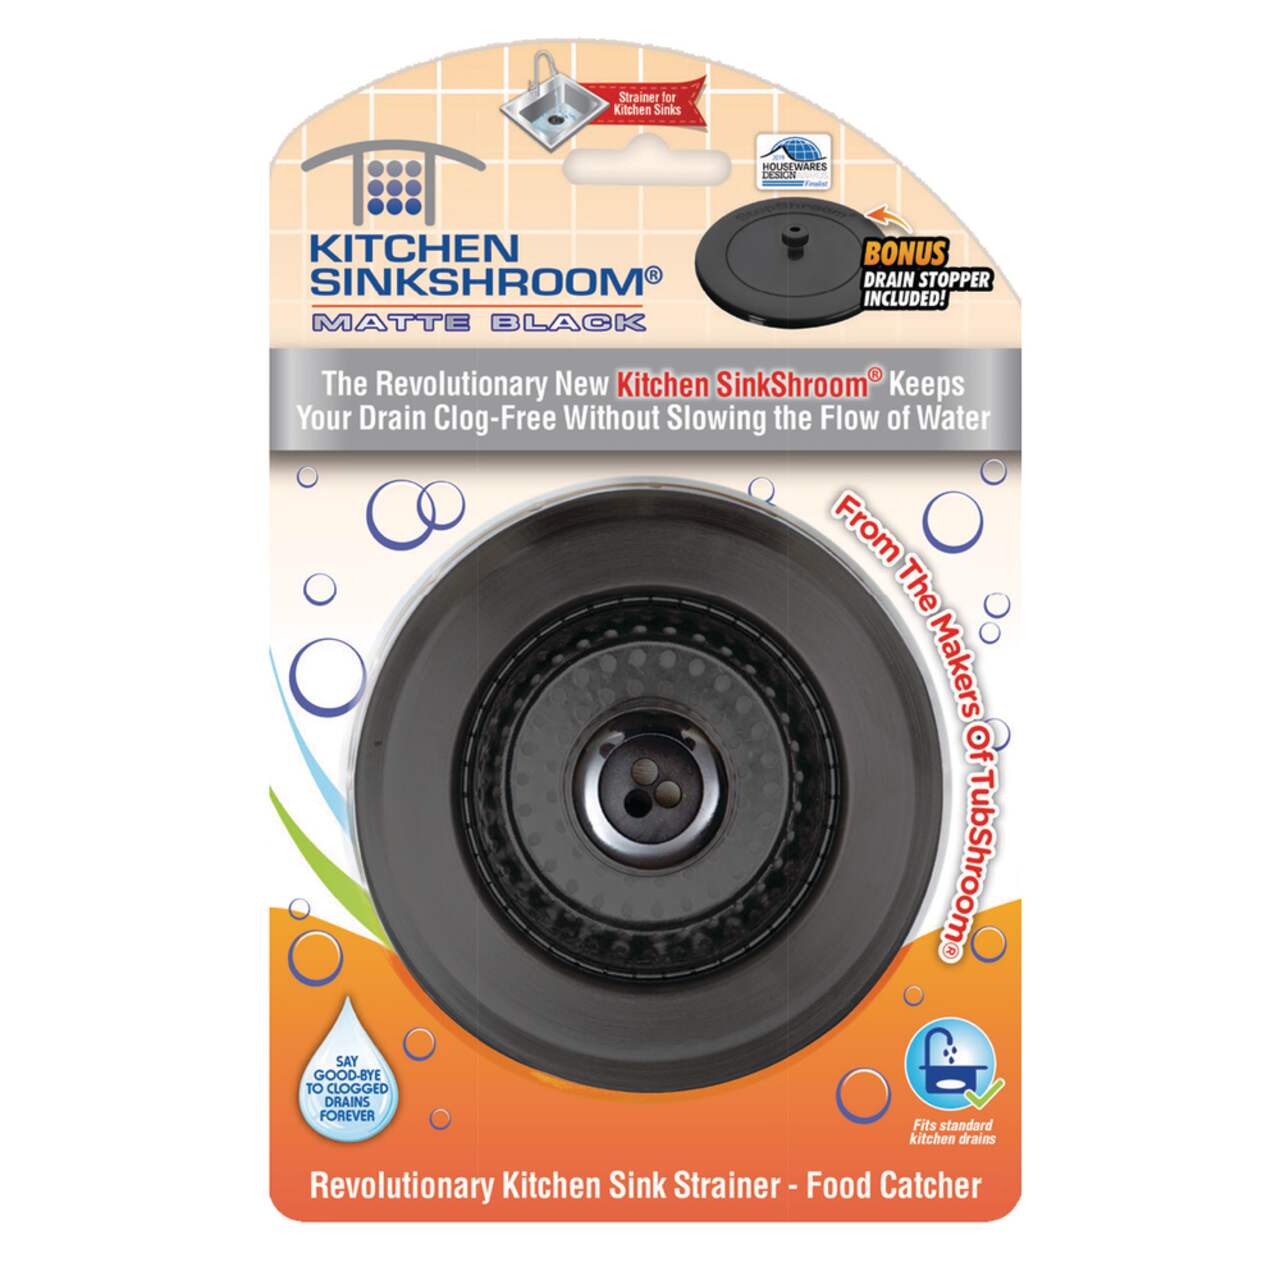 https://media-www.canadiantire.ca/product/fixing/plumbing/rough-plumbing/0632728/kitchen-sinkshroom-w-stopper-matte-black-a6cecf03-1121-4f38-8364-dd0850a244e1.png?imdensity=1&imwidth=1244&impolicy=mZoom